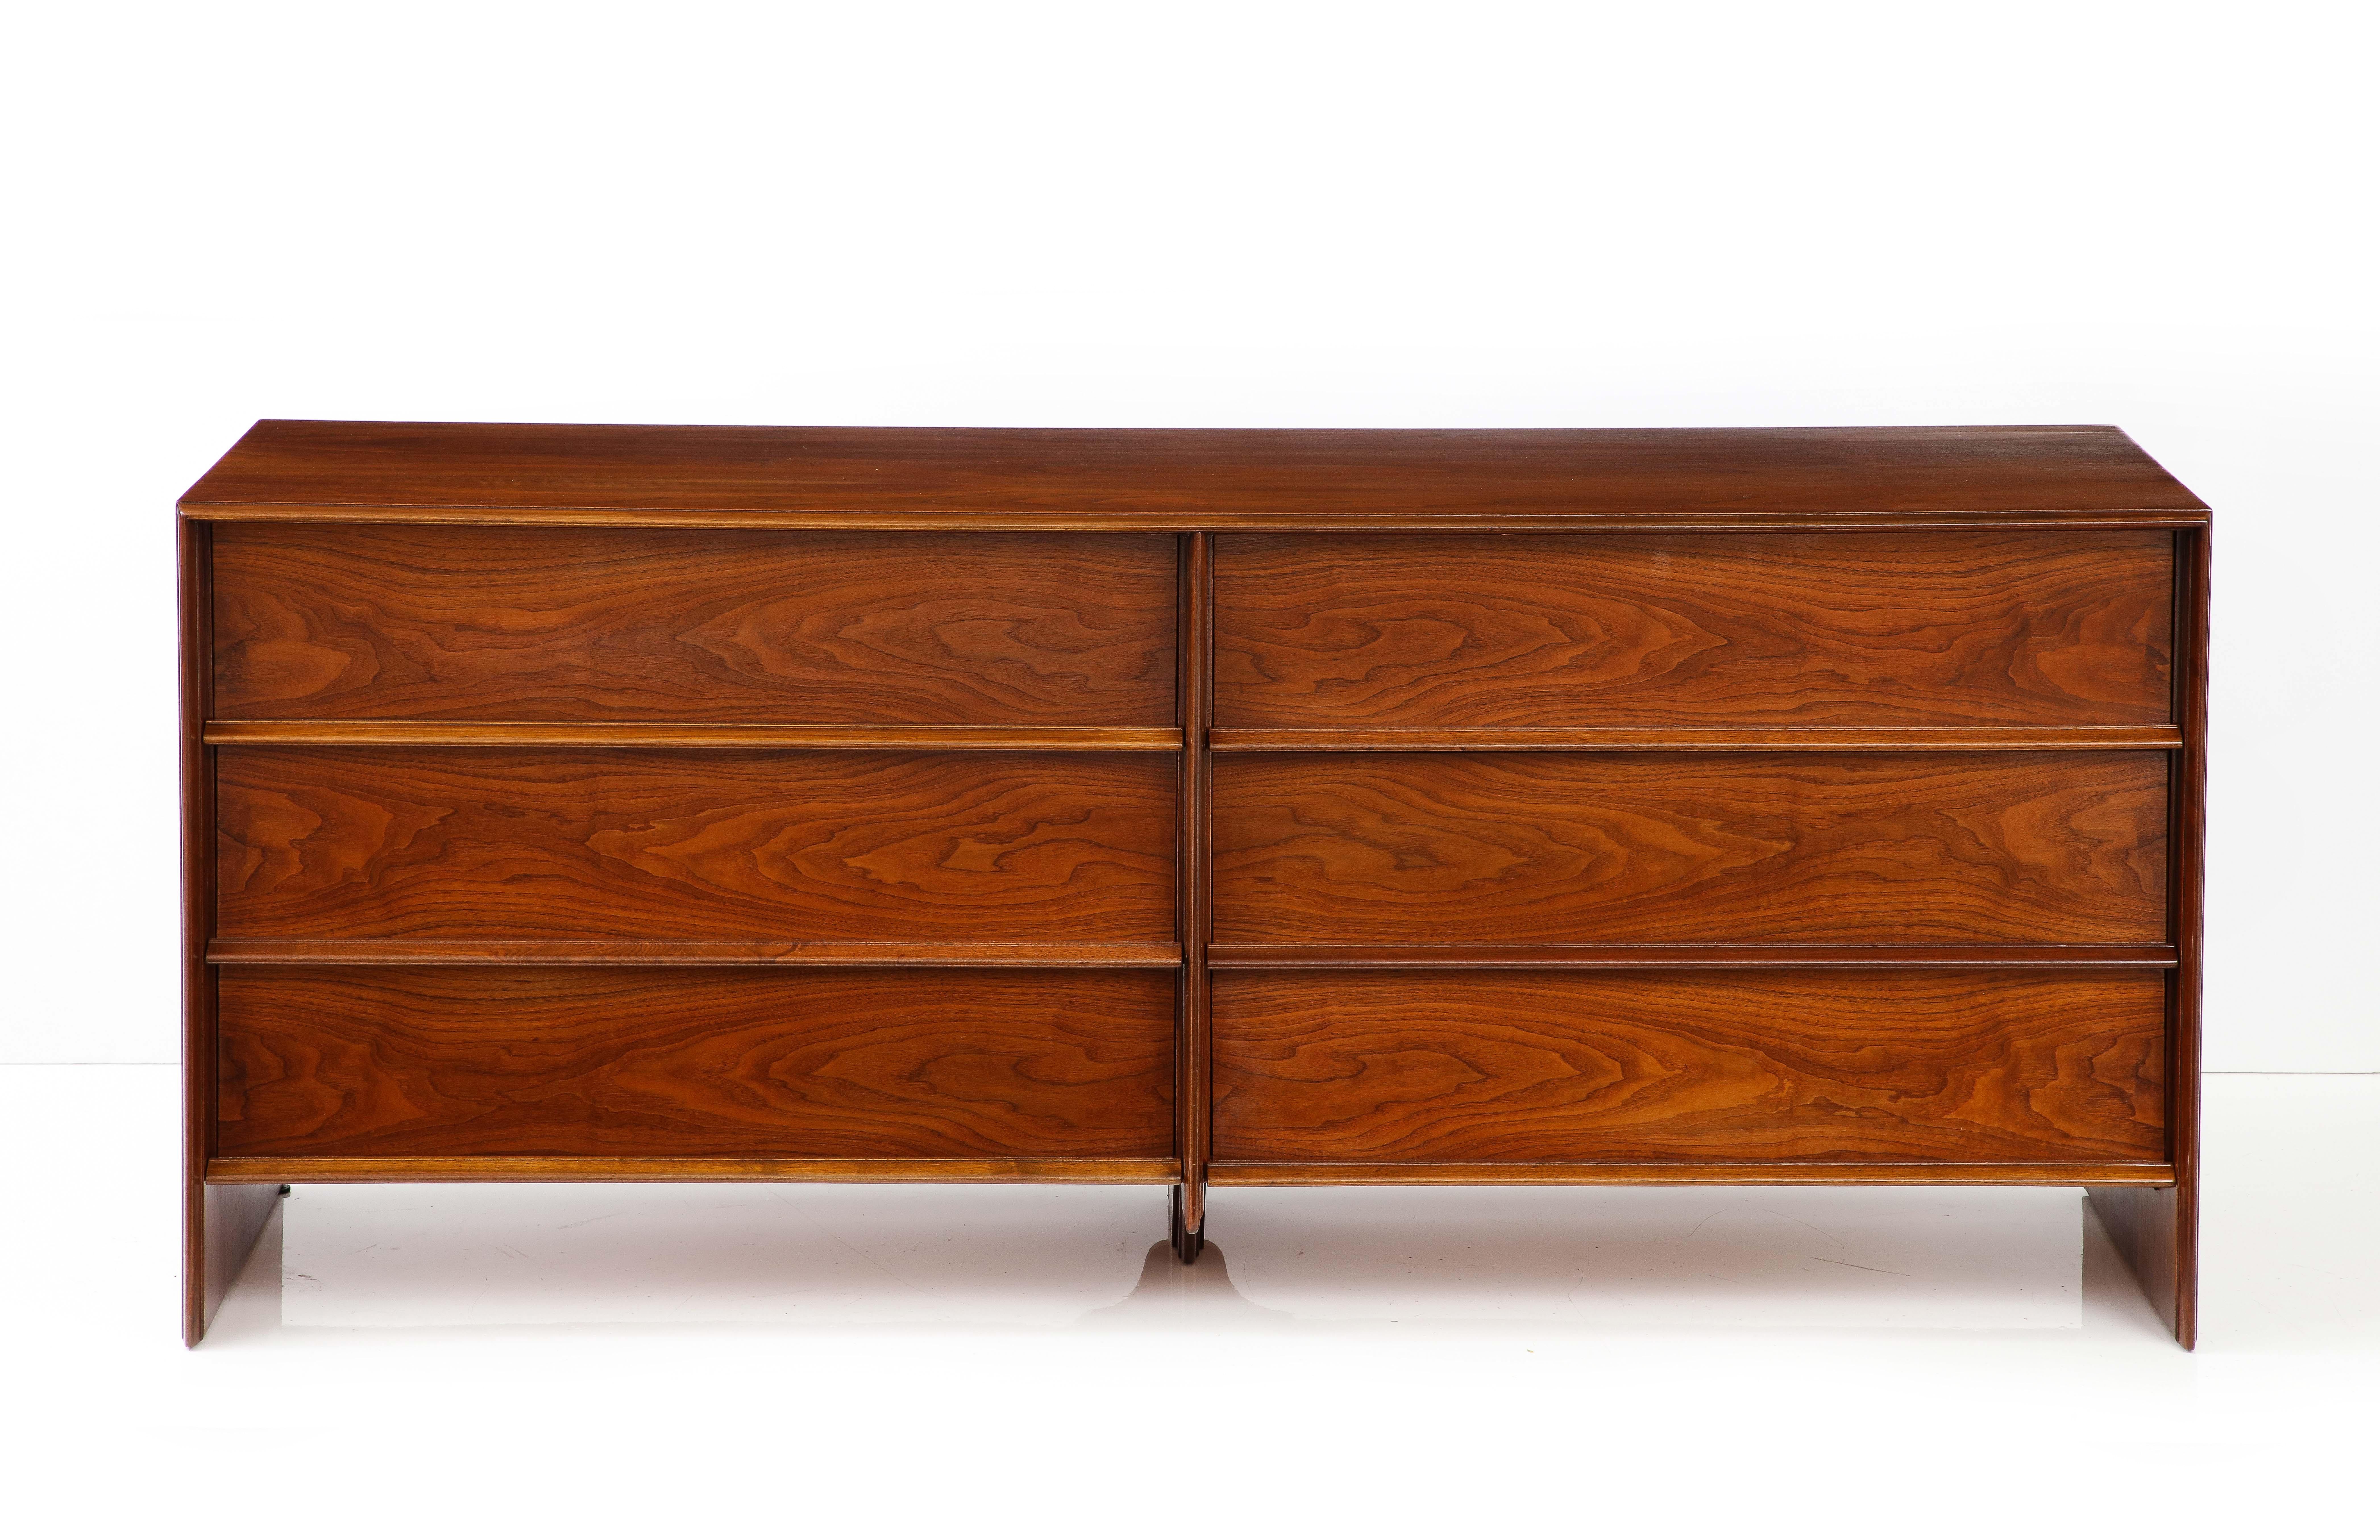 1960's Mid-Century Modern solid walnut 6 drawer dresser designed by T.H. Robsjohn Gibbings for Widdicomb, Fully restored with minor wear and patina due to age and use.